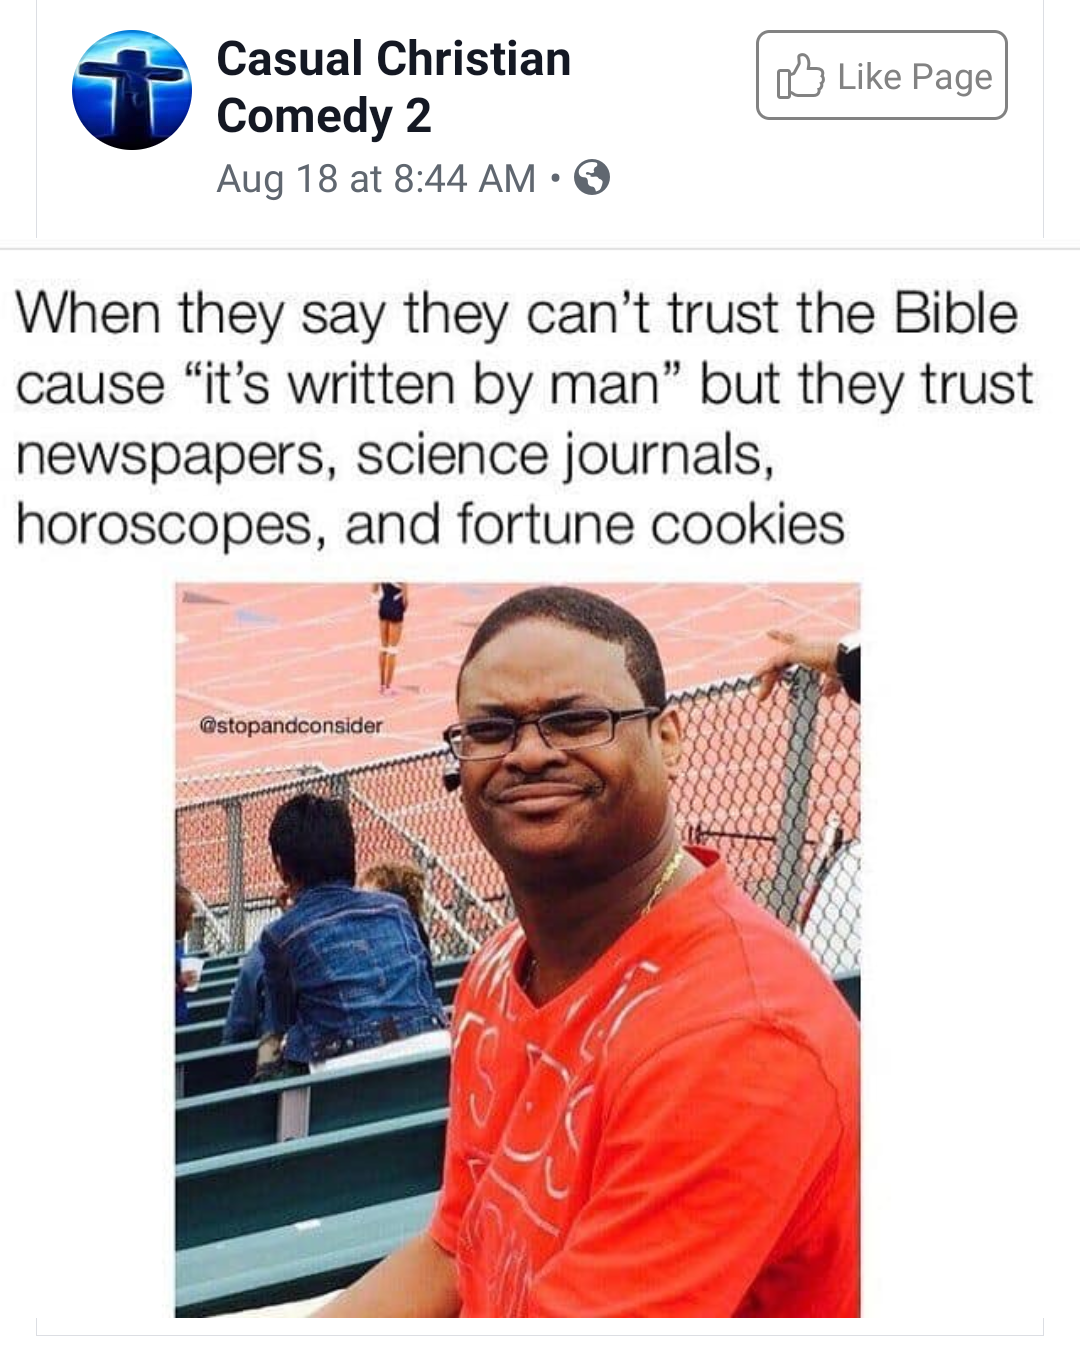 meme trap card - Page Casual Christian Comedy 2 Aug 18 at When they say they can't trust the Bible cause "it's written by man" but they trust newspapers, science journals, horoscopes, and fortune cookies Ostopandoonsider